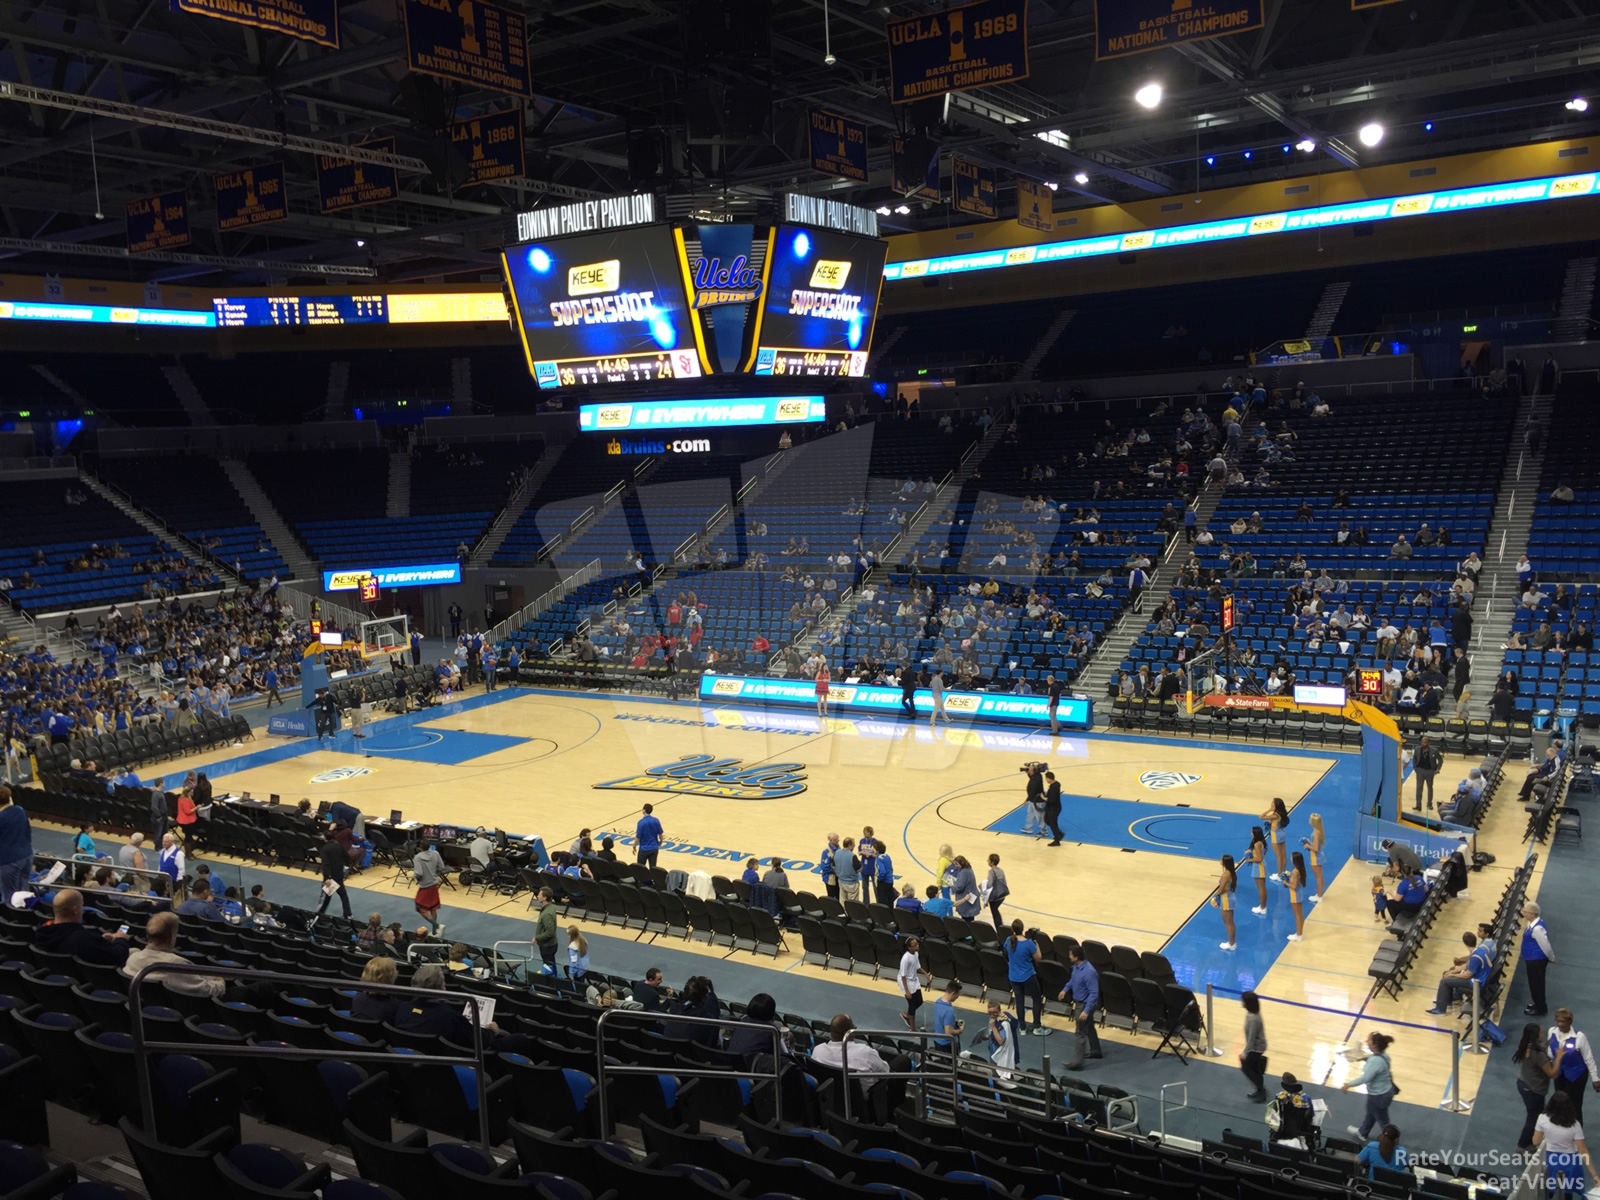 section 113, row 13 seat view  - pauley pavilion